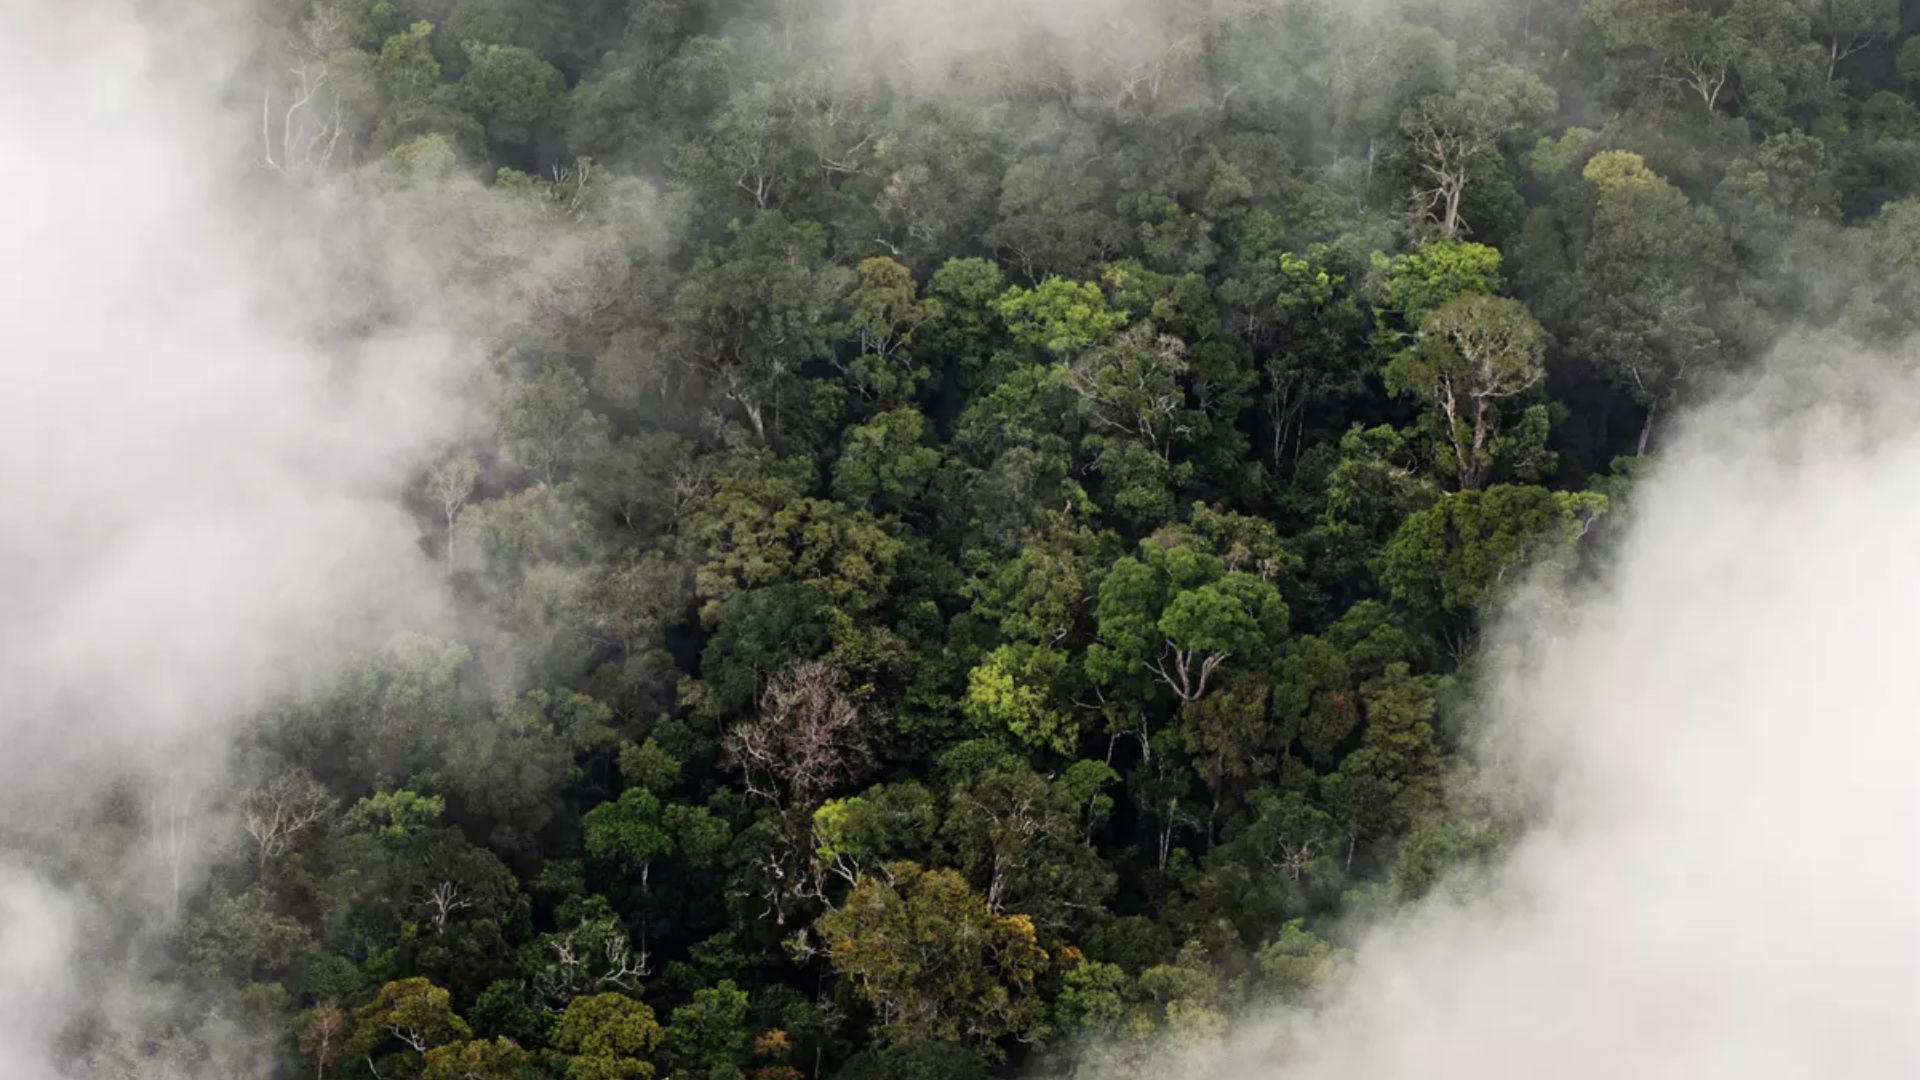 Amazon rainforest as seen from above. Image by Vox. Brazil, 2019. 